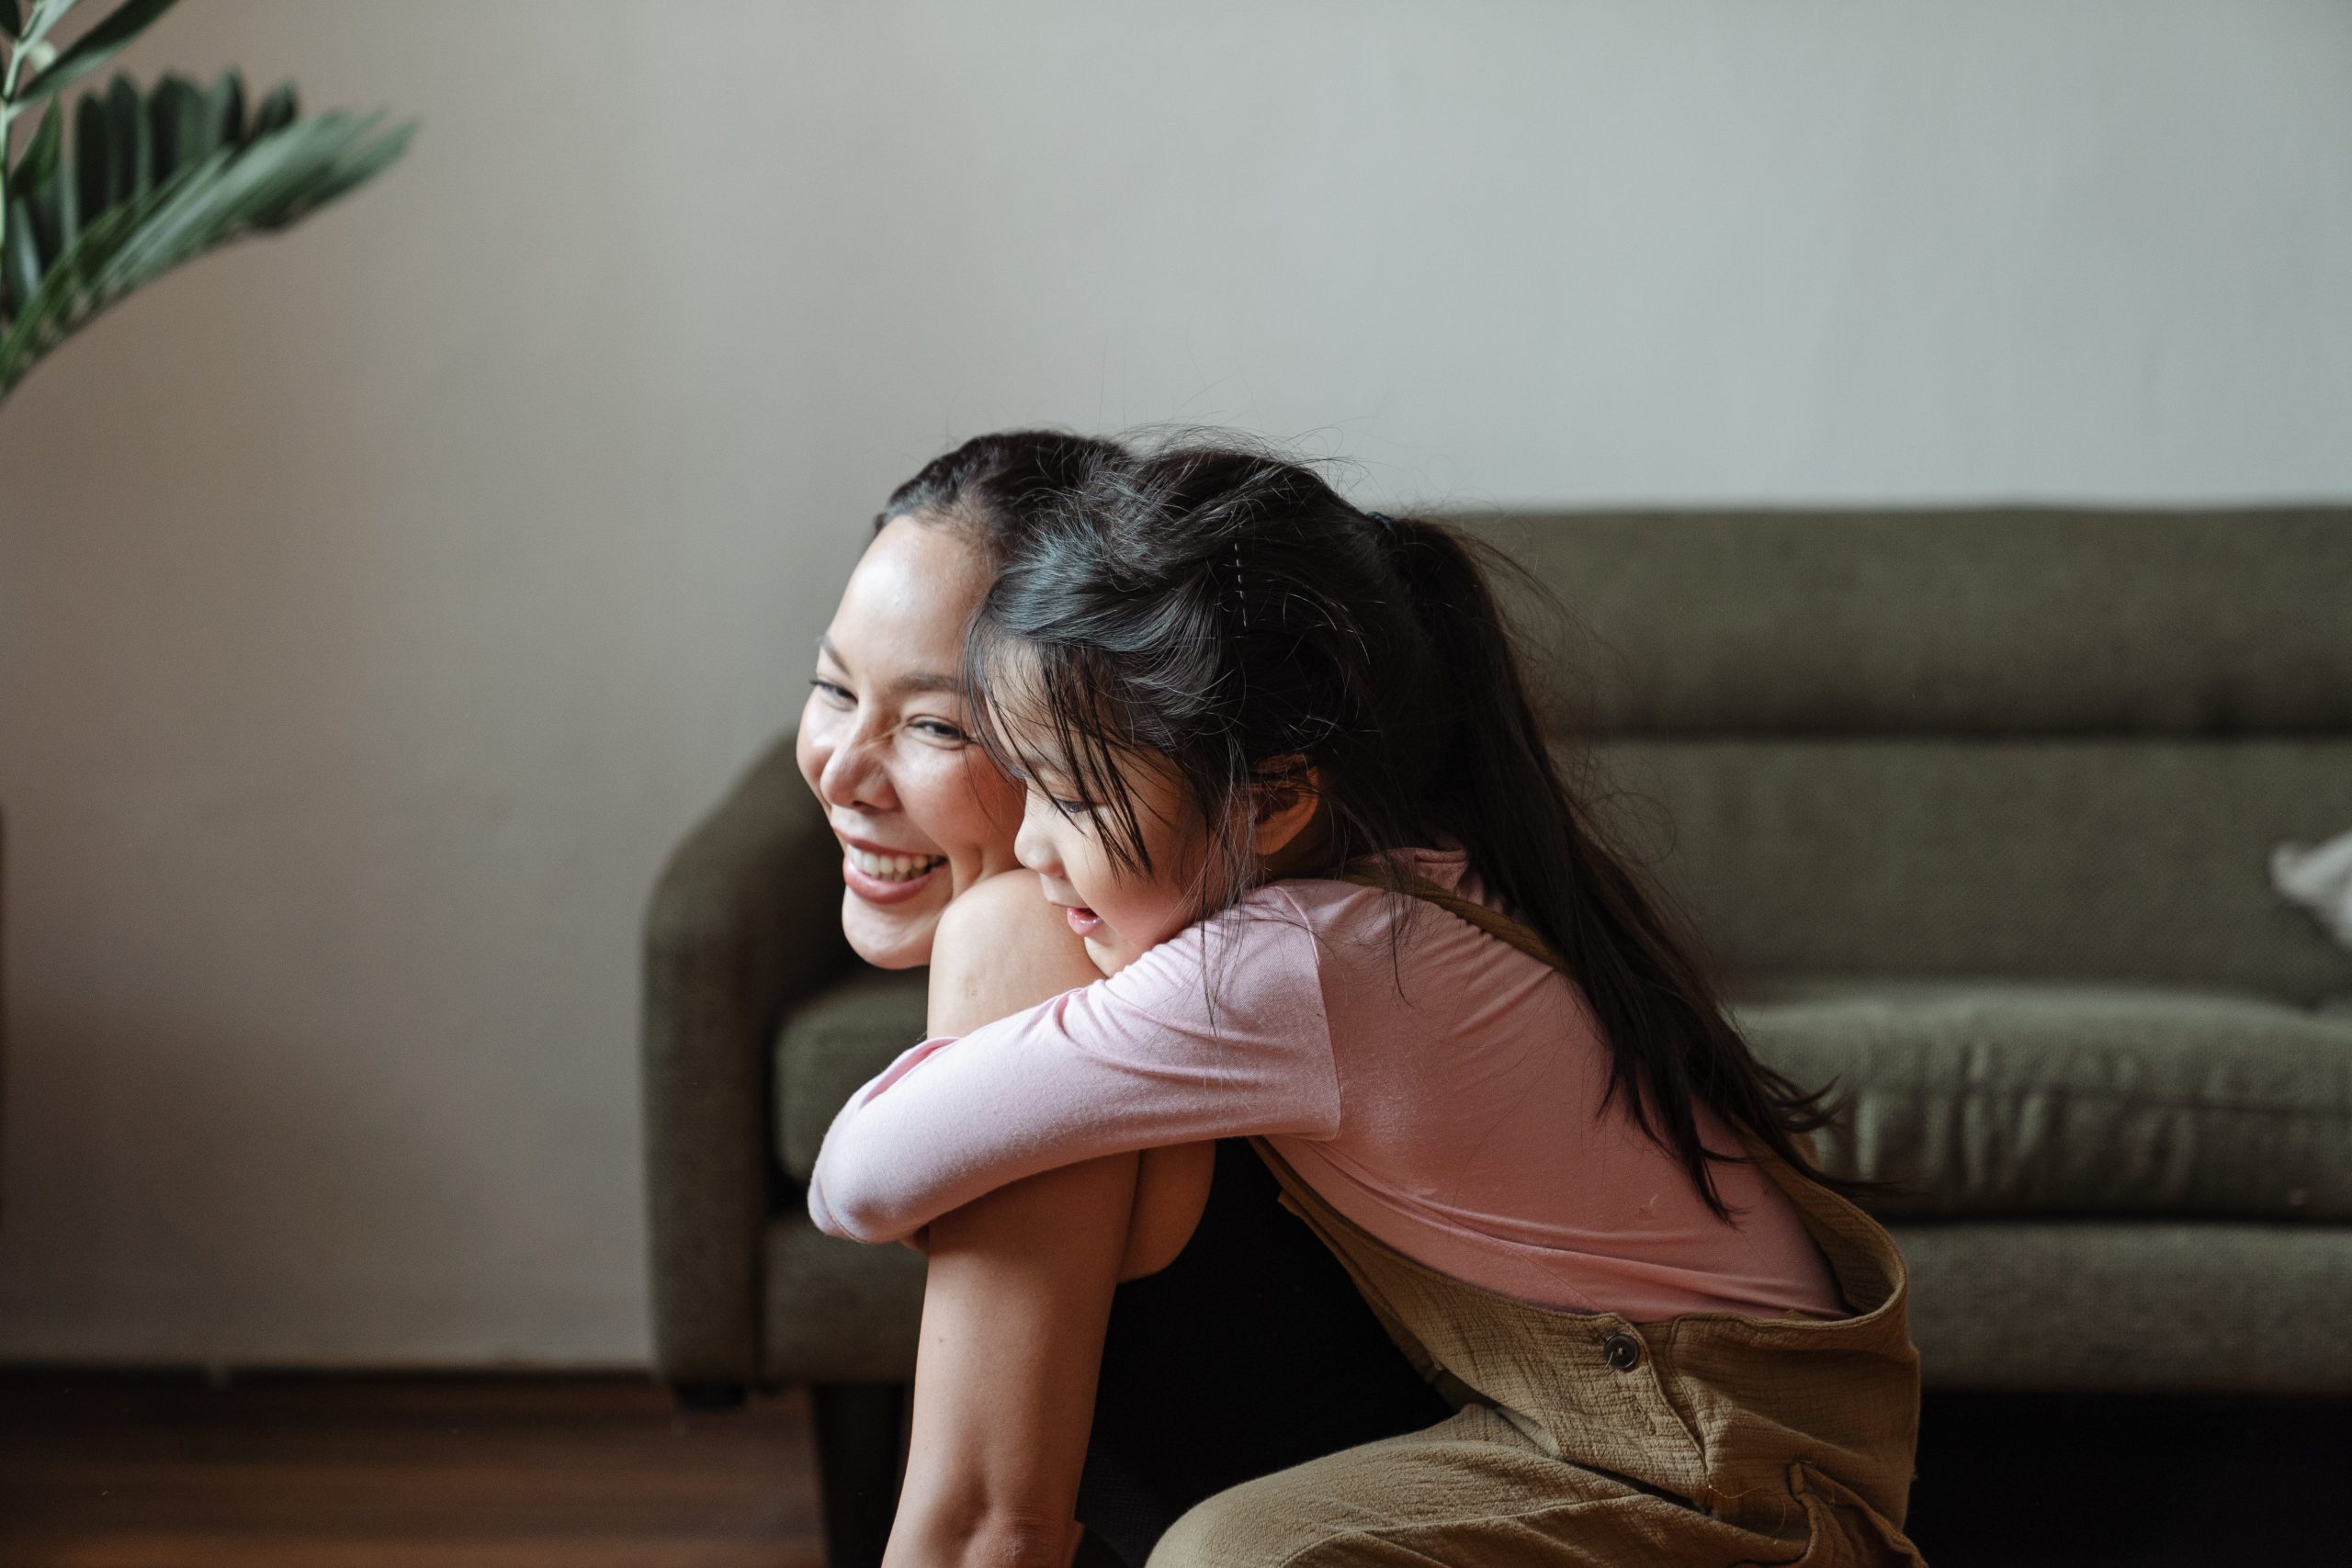 A joyful woman and a young girl hugging and laughing together in a cozy home setting.